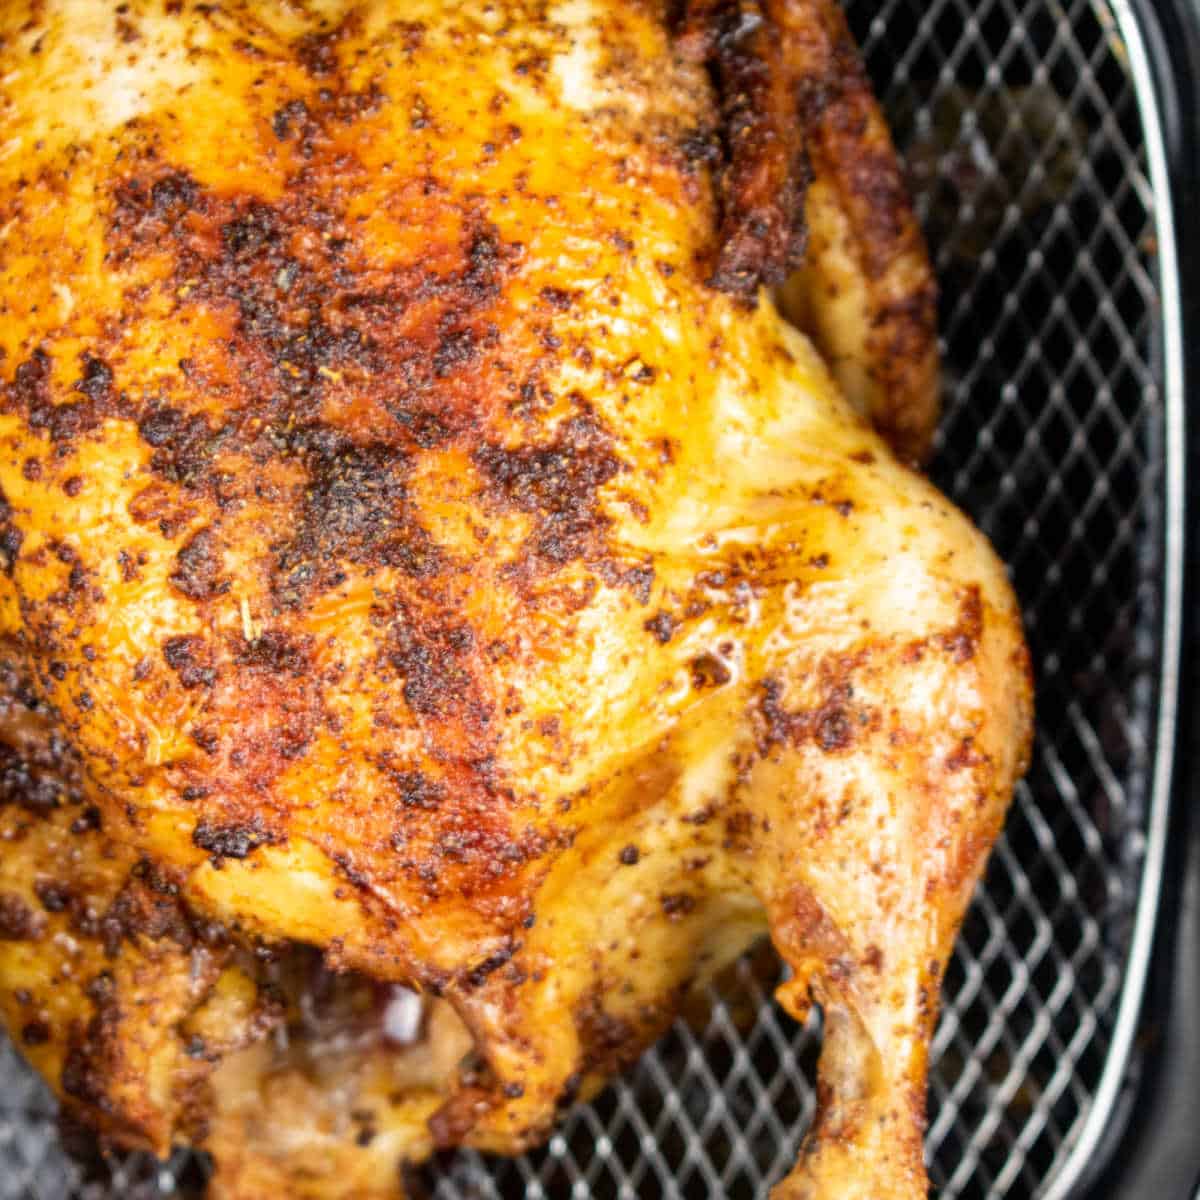 A close up of a golden brown roast chicken in the basket of an air fryer.